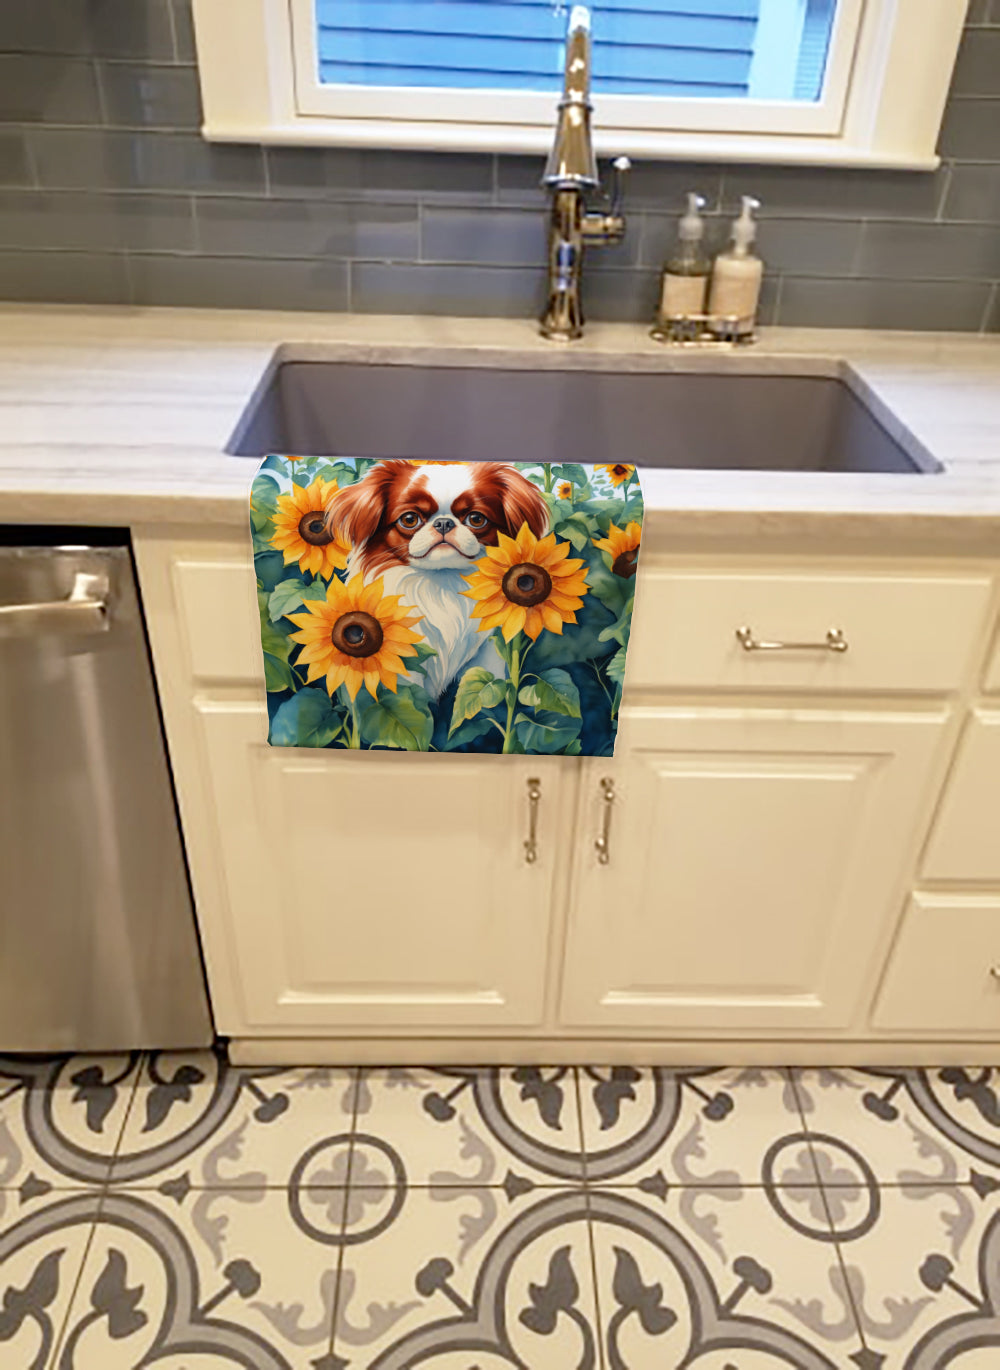 Buy this Japanese Chin in Sunflowers Kitchen Towel